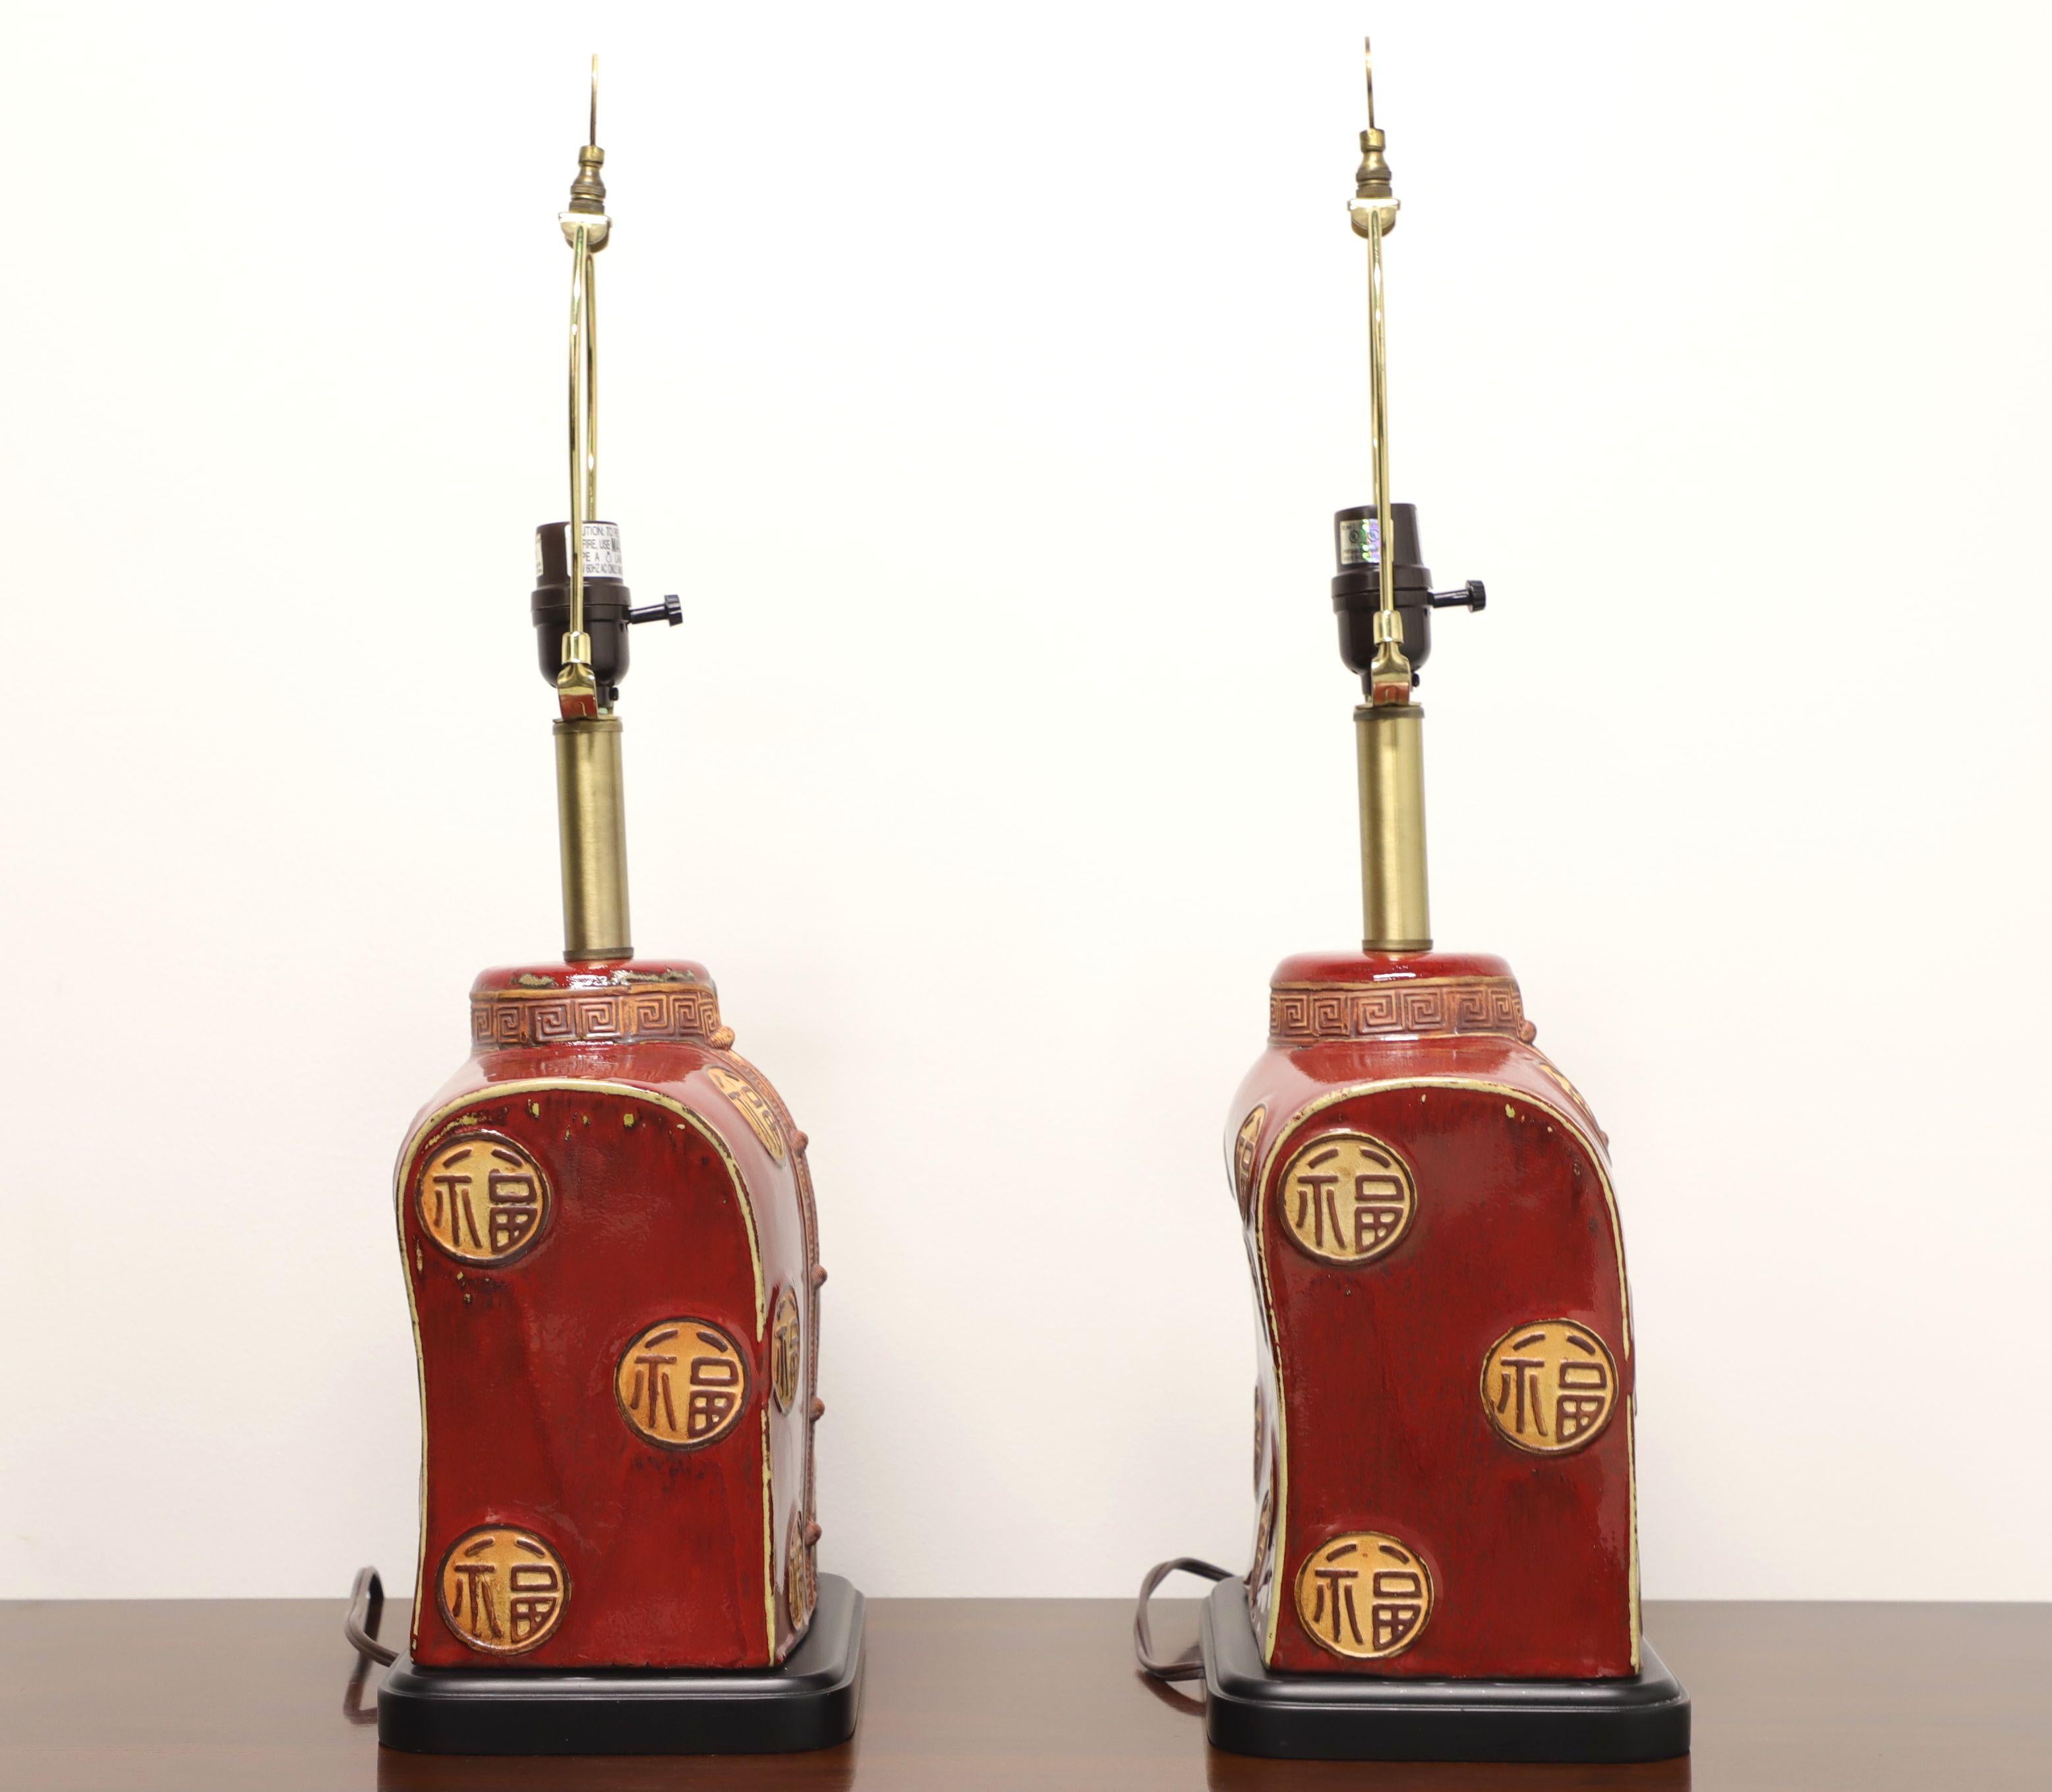 A pair of Asian style table lamps, unbranded. Made of porcelain to represent a Chinese Tang Suit in red and gold, on a black painted wood base. Has bass neck, harps and finials. Single standard bulb socket and 3-way rotary switch. Likely made in